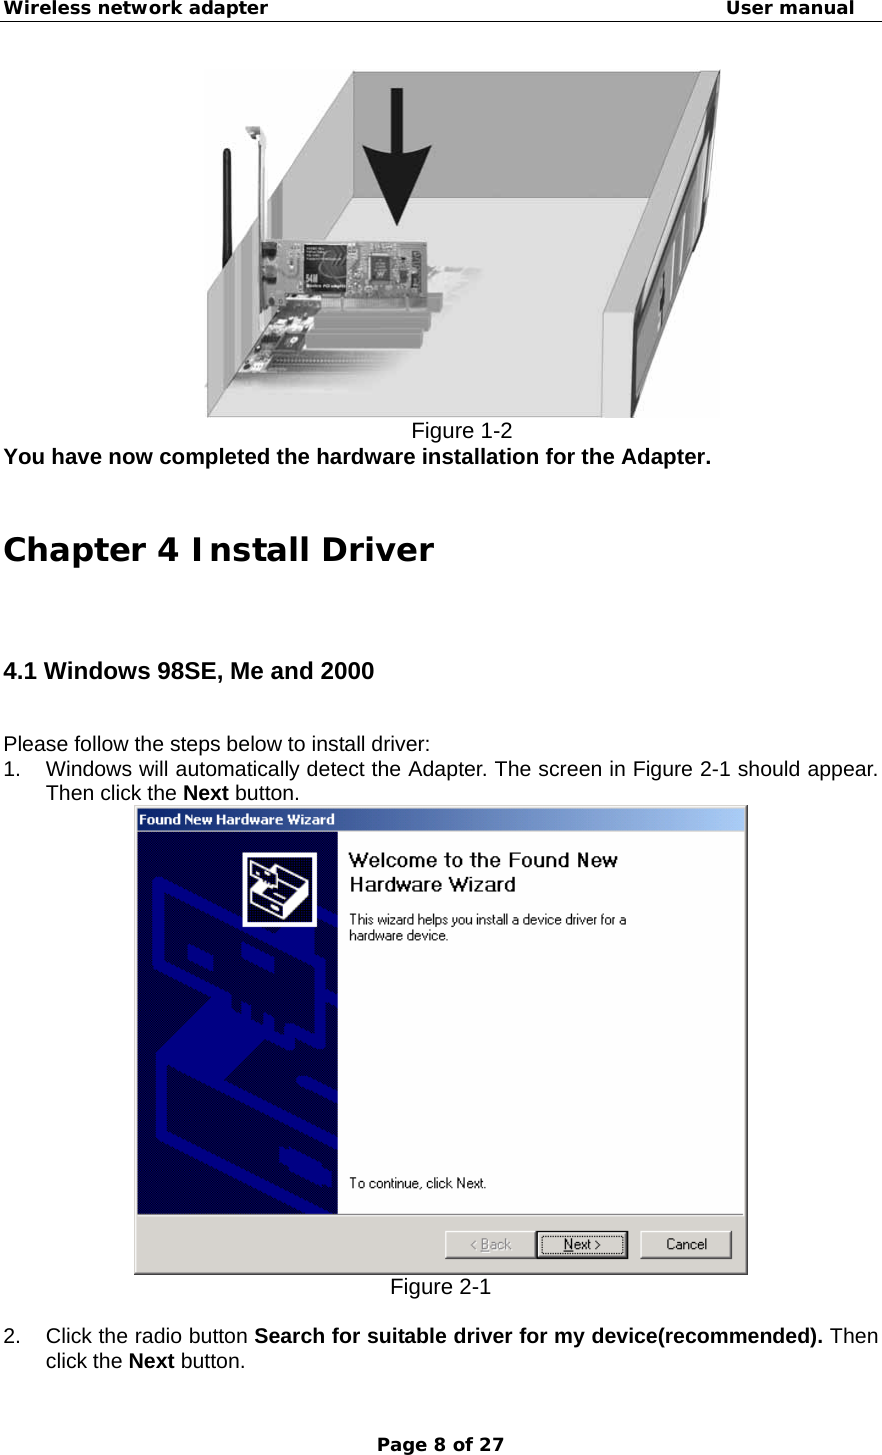 Wireless network adapter                                                  User manual Page 8 of 27  Figure 1-2 You have now completed the hardware installation for the Adapter.    Chapter 4 Install Driver  4.1 Windows 98SE, Me and 2000 Please follow the steps below to install driver: 1.  Windows will automatically detect the Adapter. The screen in Figure 2-1 should appear. Then click the Next button.  Figure 2-1  2.  Click the radio button Search for suitable driver for my device(recommended). Then click the Next button. 